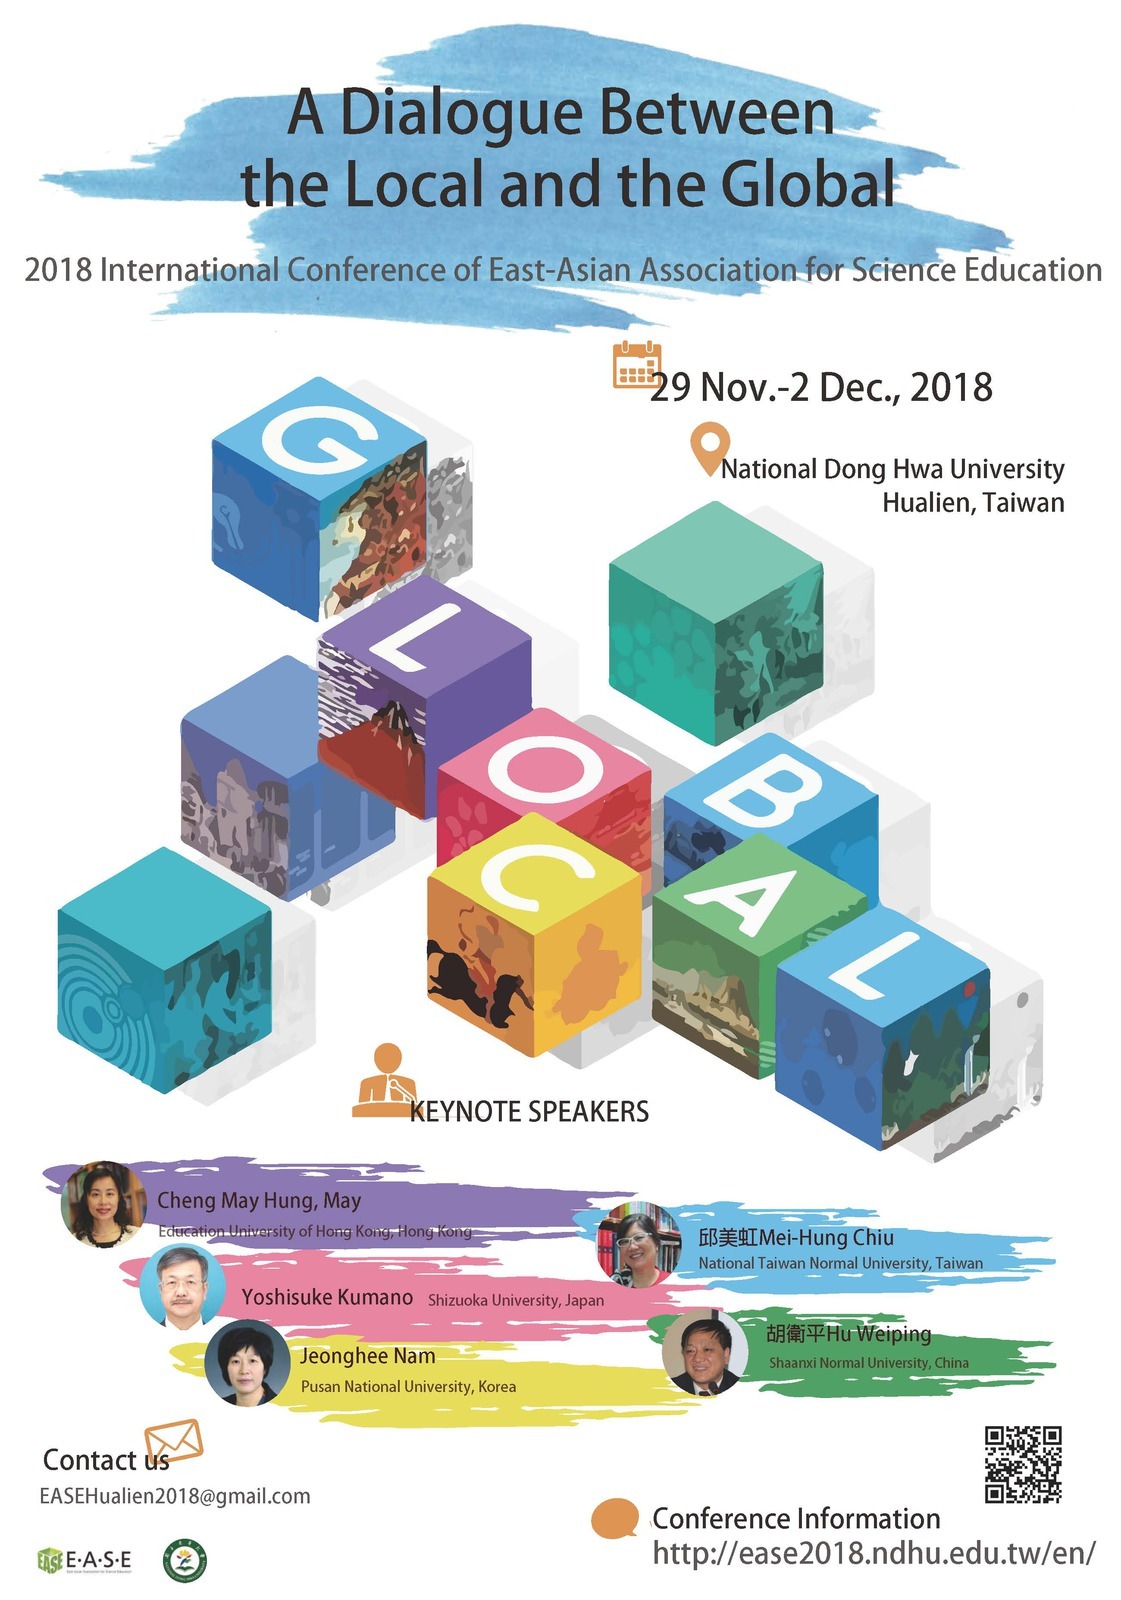 2018 International Conference of East-Asian Association for Science Education